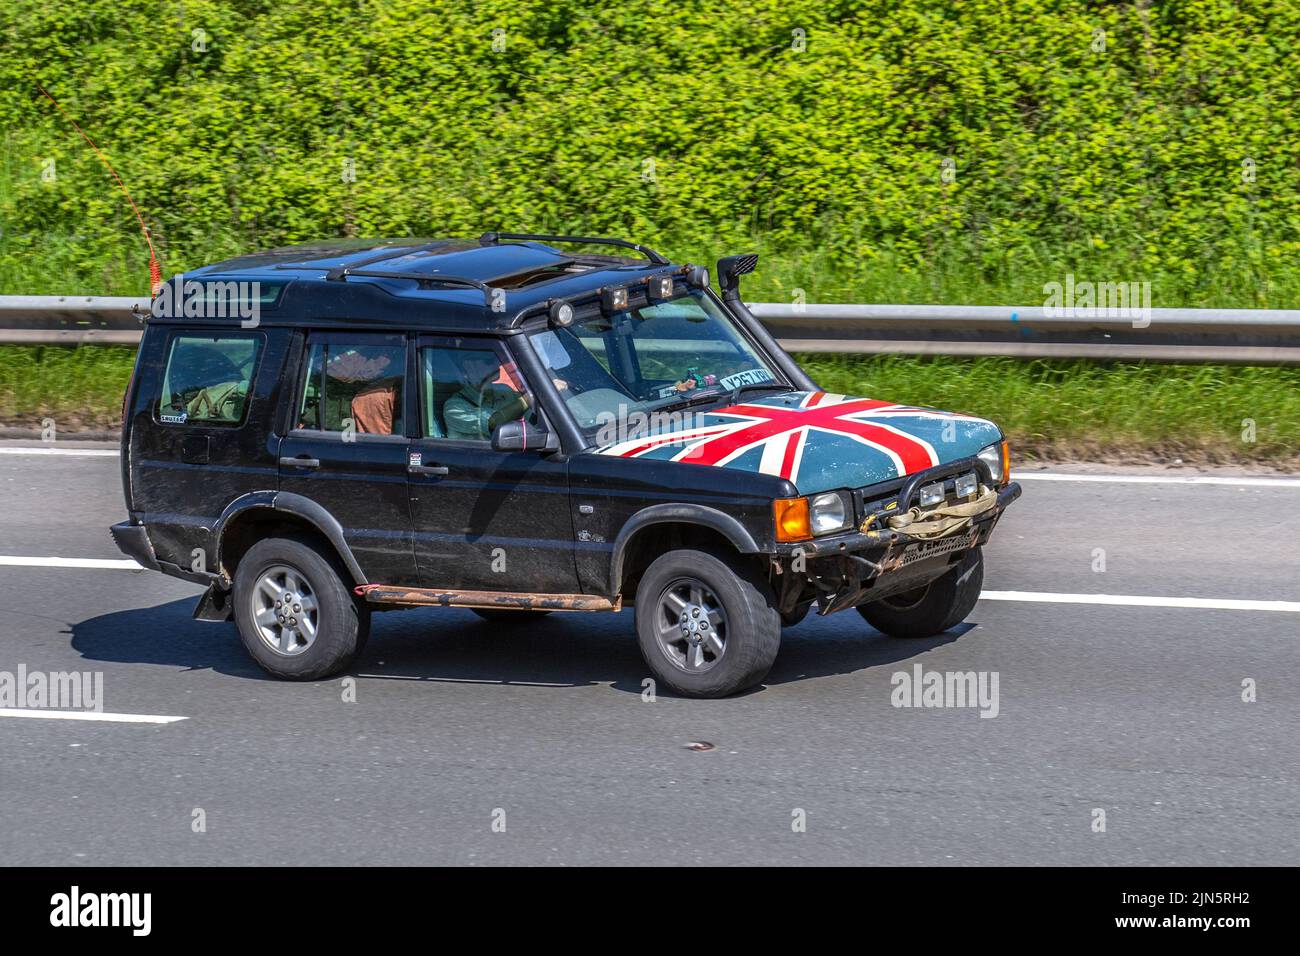 2001 Custom Black Land Rover Discovery 2495cc Diesel SUV 44 off-road with Union Jack bonnet vinyl cap; Stock Photo